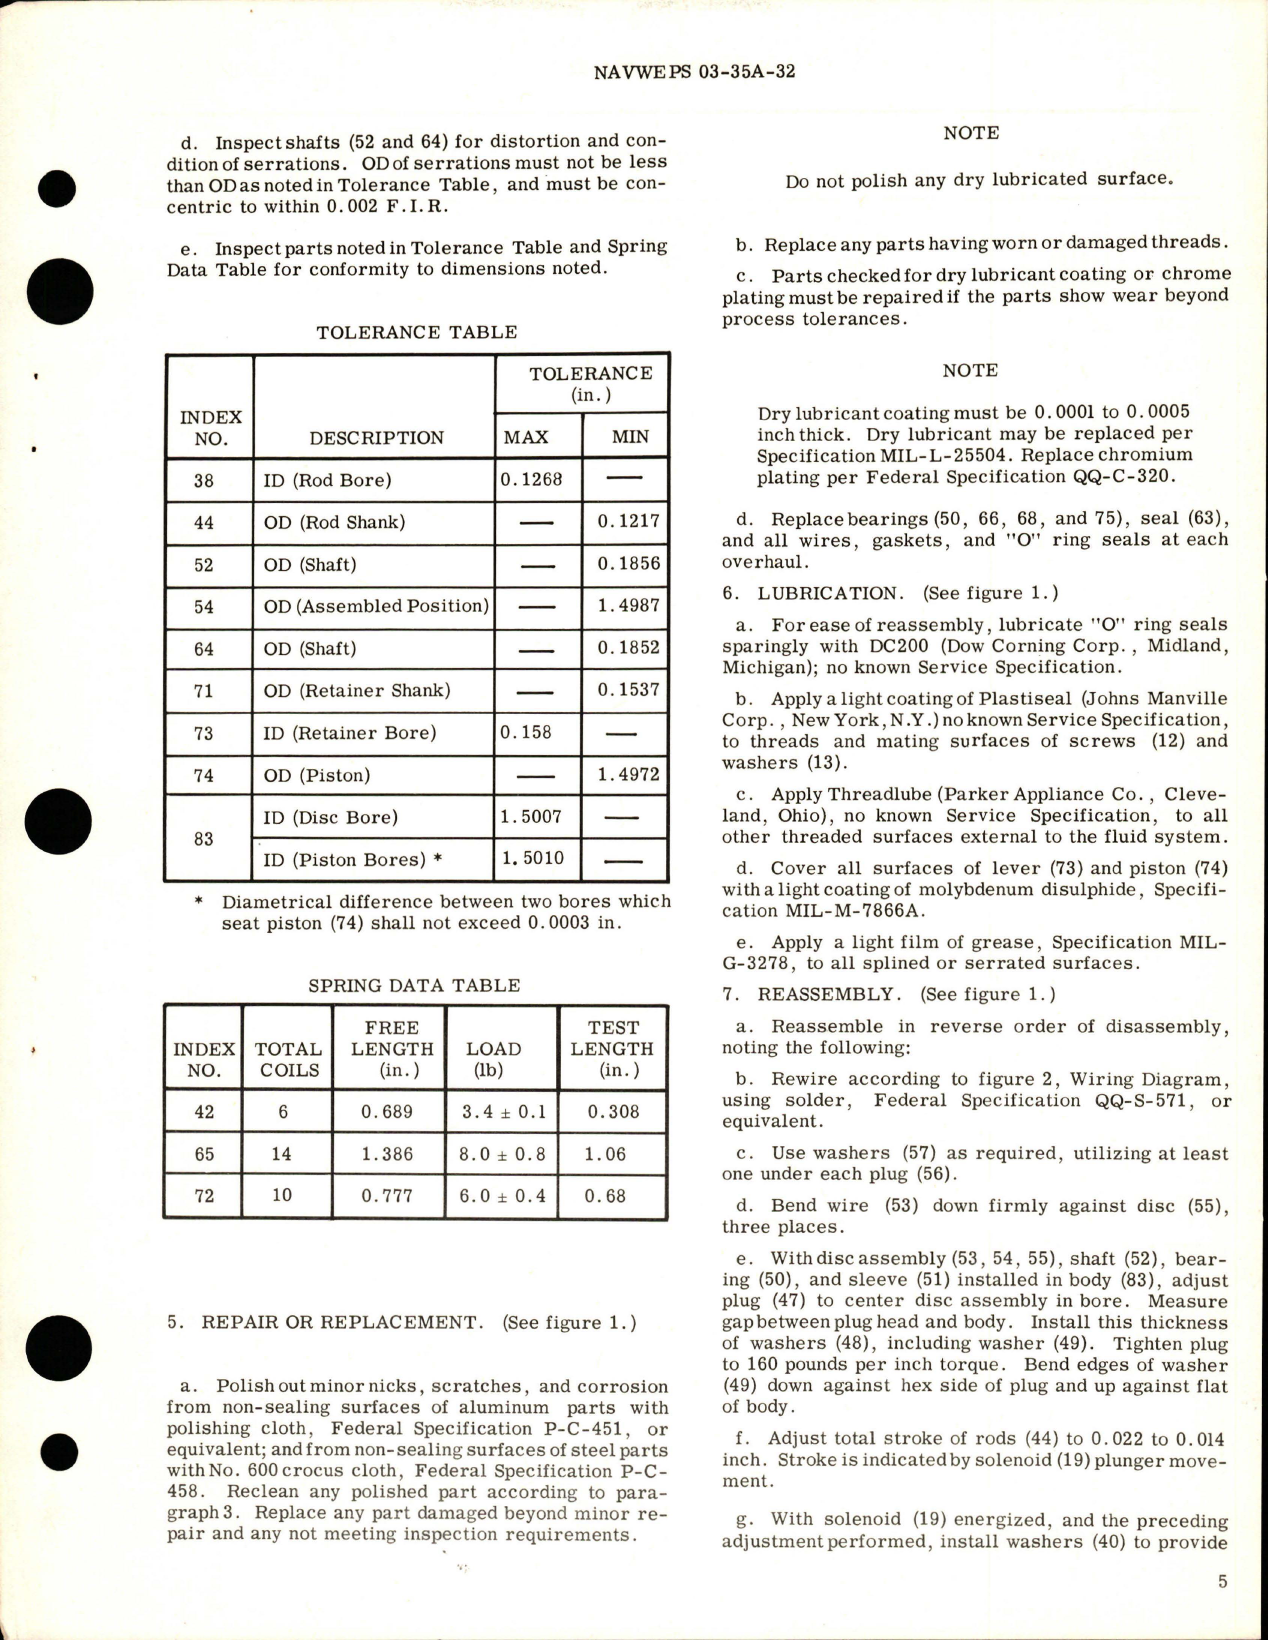 Sample page 5 from AirCorps Library document: Overhaul Instructions with Parts Breakdown for Solenoid Pilot Operated Butterfly Shutoff Valve - Part 124675